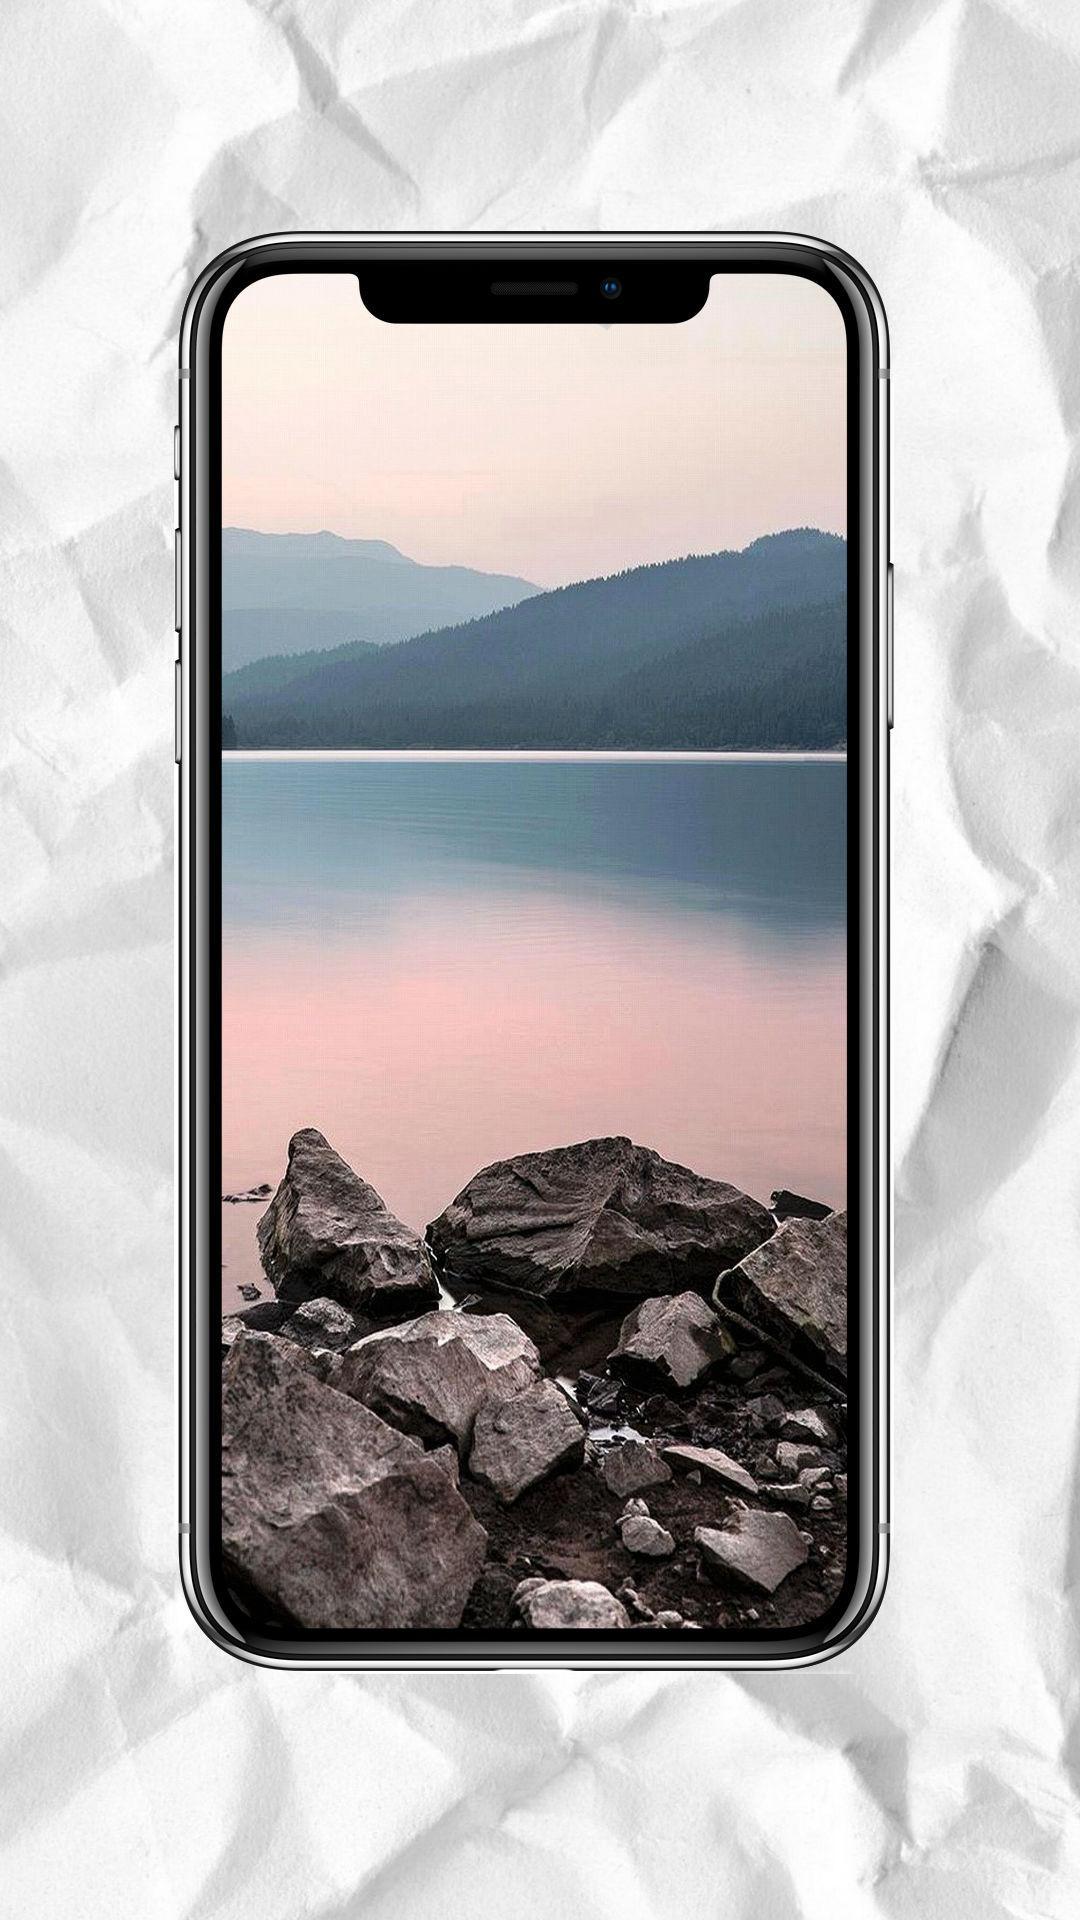 Full Hd Mobile Wallpapers 2018 For Android Apk Download